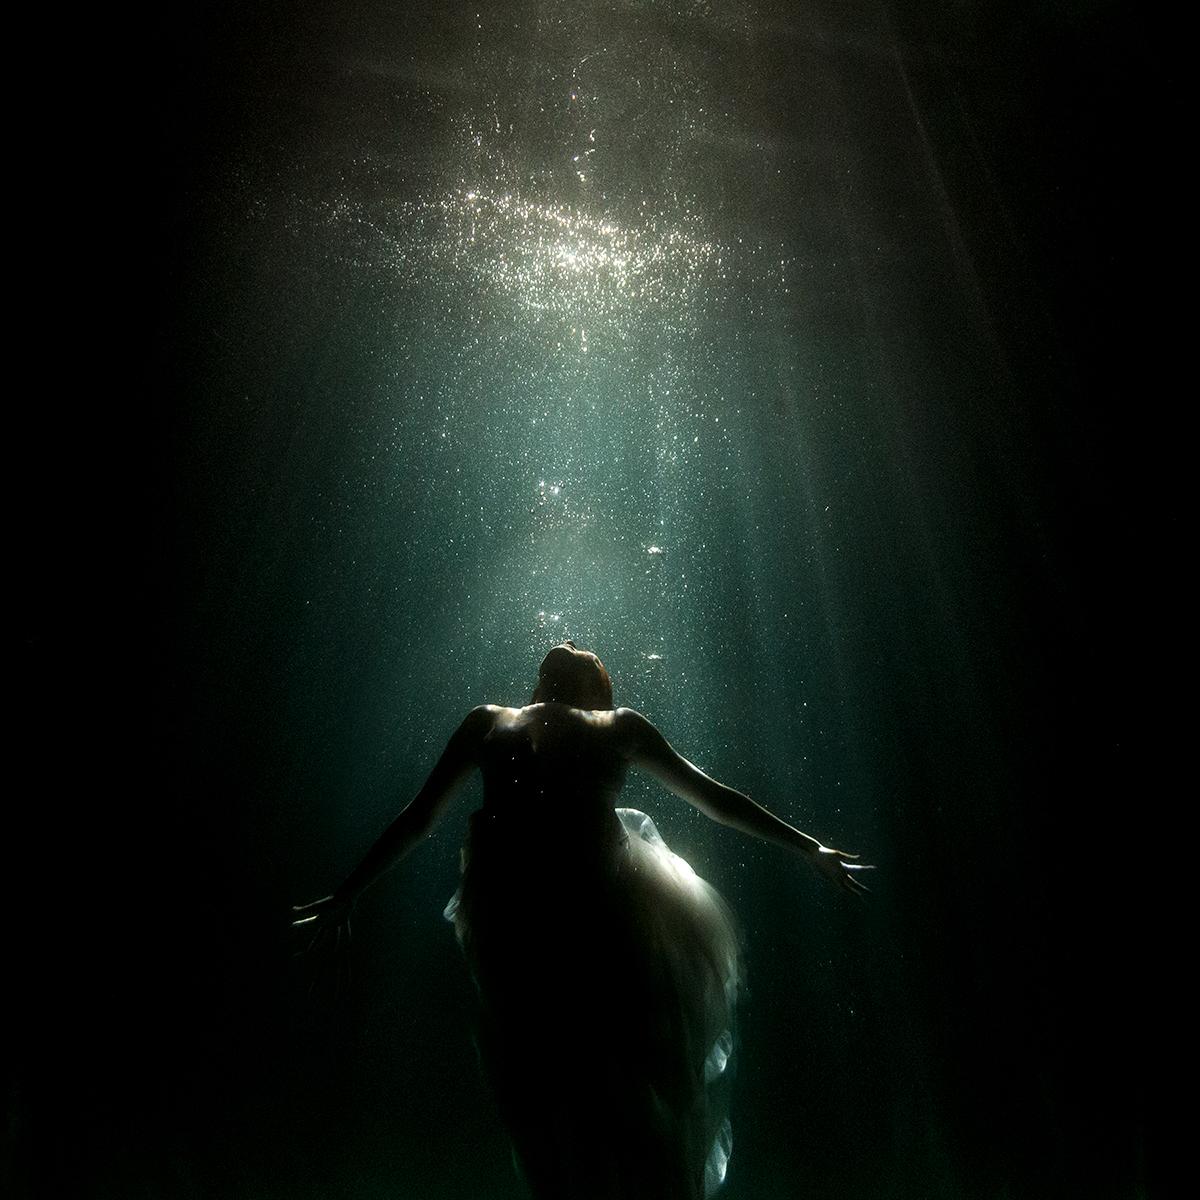 Series: Submerged
Chromogenic Print on Kodak Endura Luster Paper
All available sizes and editions:
30" x 20"
60" x 40"
72" x 48"
84" x 63"
Editions of 3 + 2 Artist Proofs

Tyler Shields is a photographer, film director, and writer, best known for